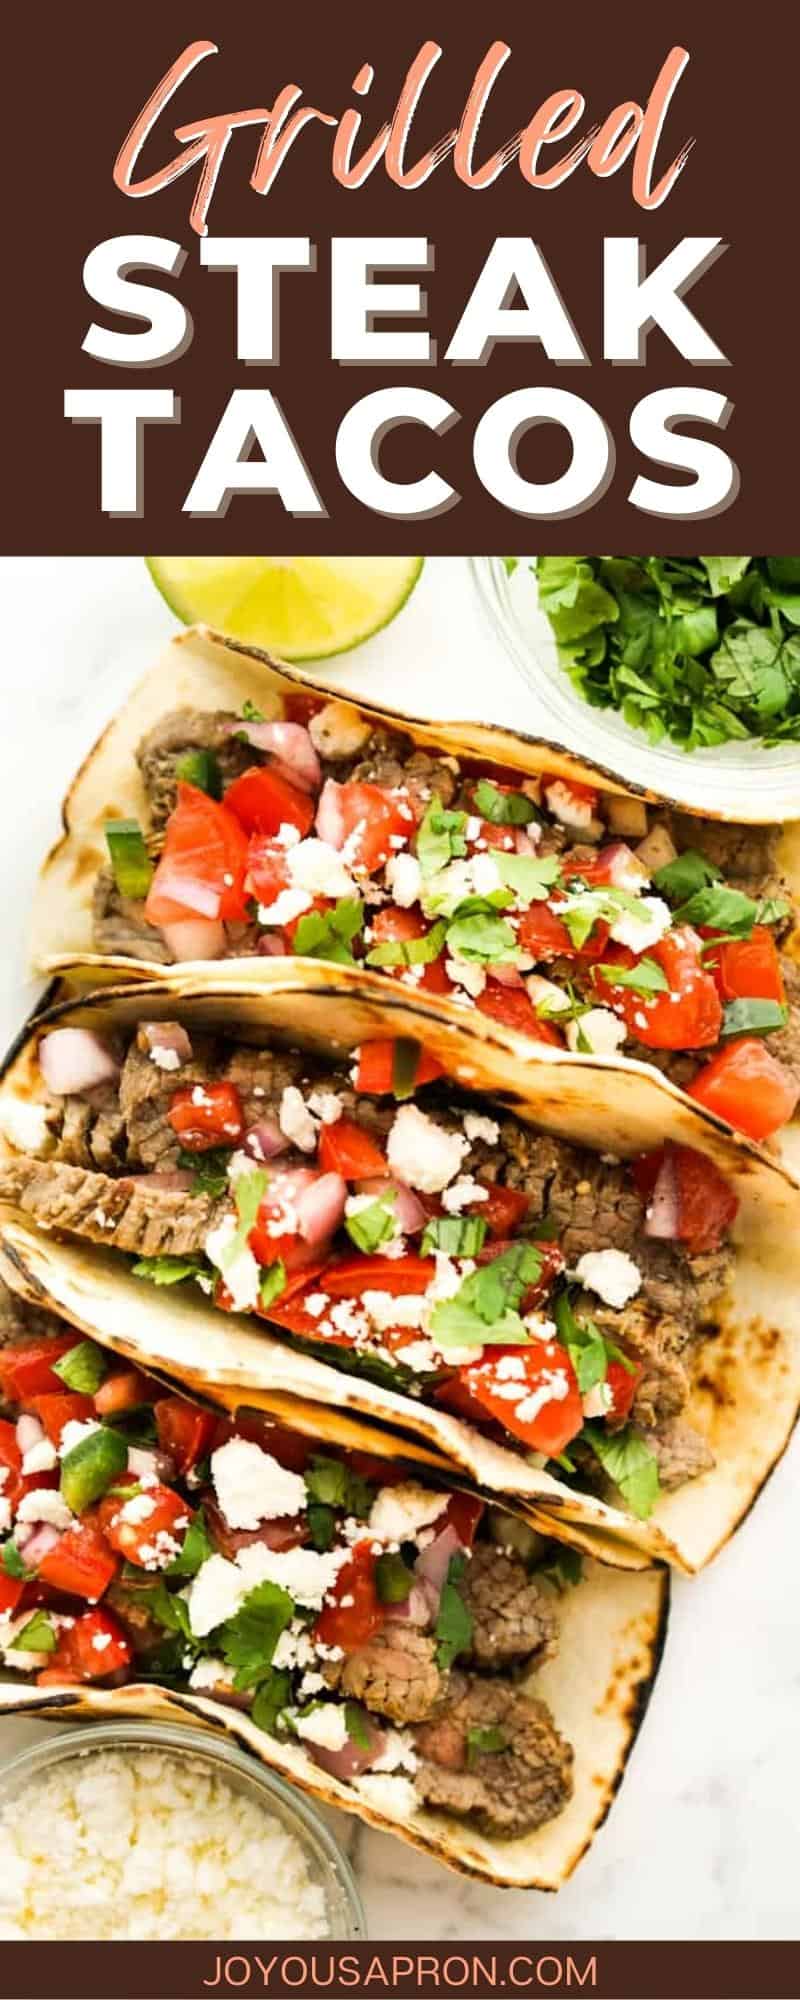 Grilled Steak Tacos - a simple beef taco recipe made on the grill or grill pan. Wrapped in flour tortilla and topped with tomatoes, jalepenos and lime juice mixture, queso fresco and more cilantro. Easy, healthy and delicious! Makes for an easy dinner meal. via @joyousapron